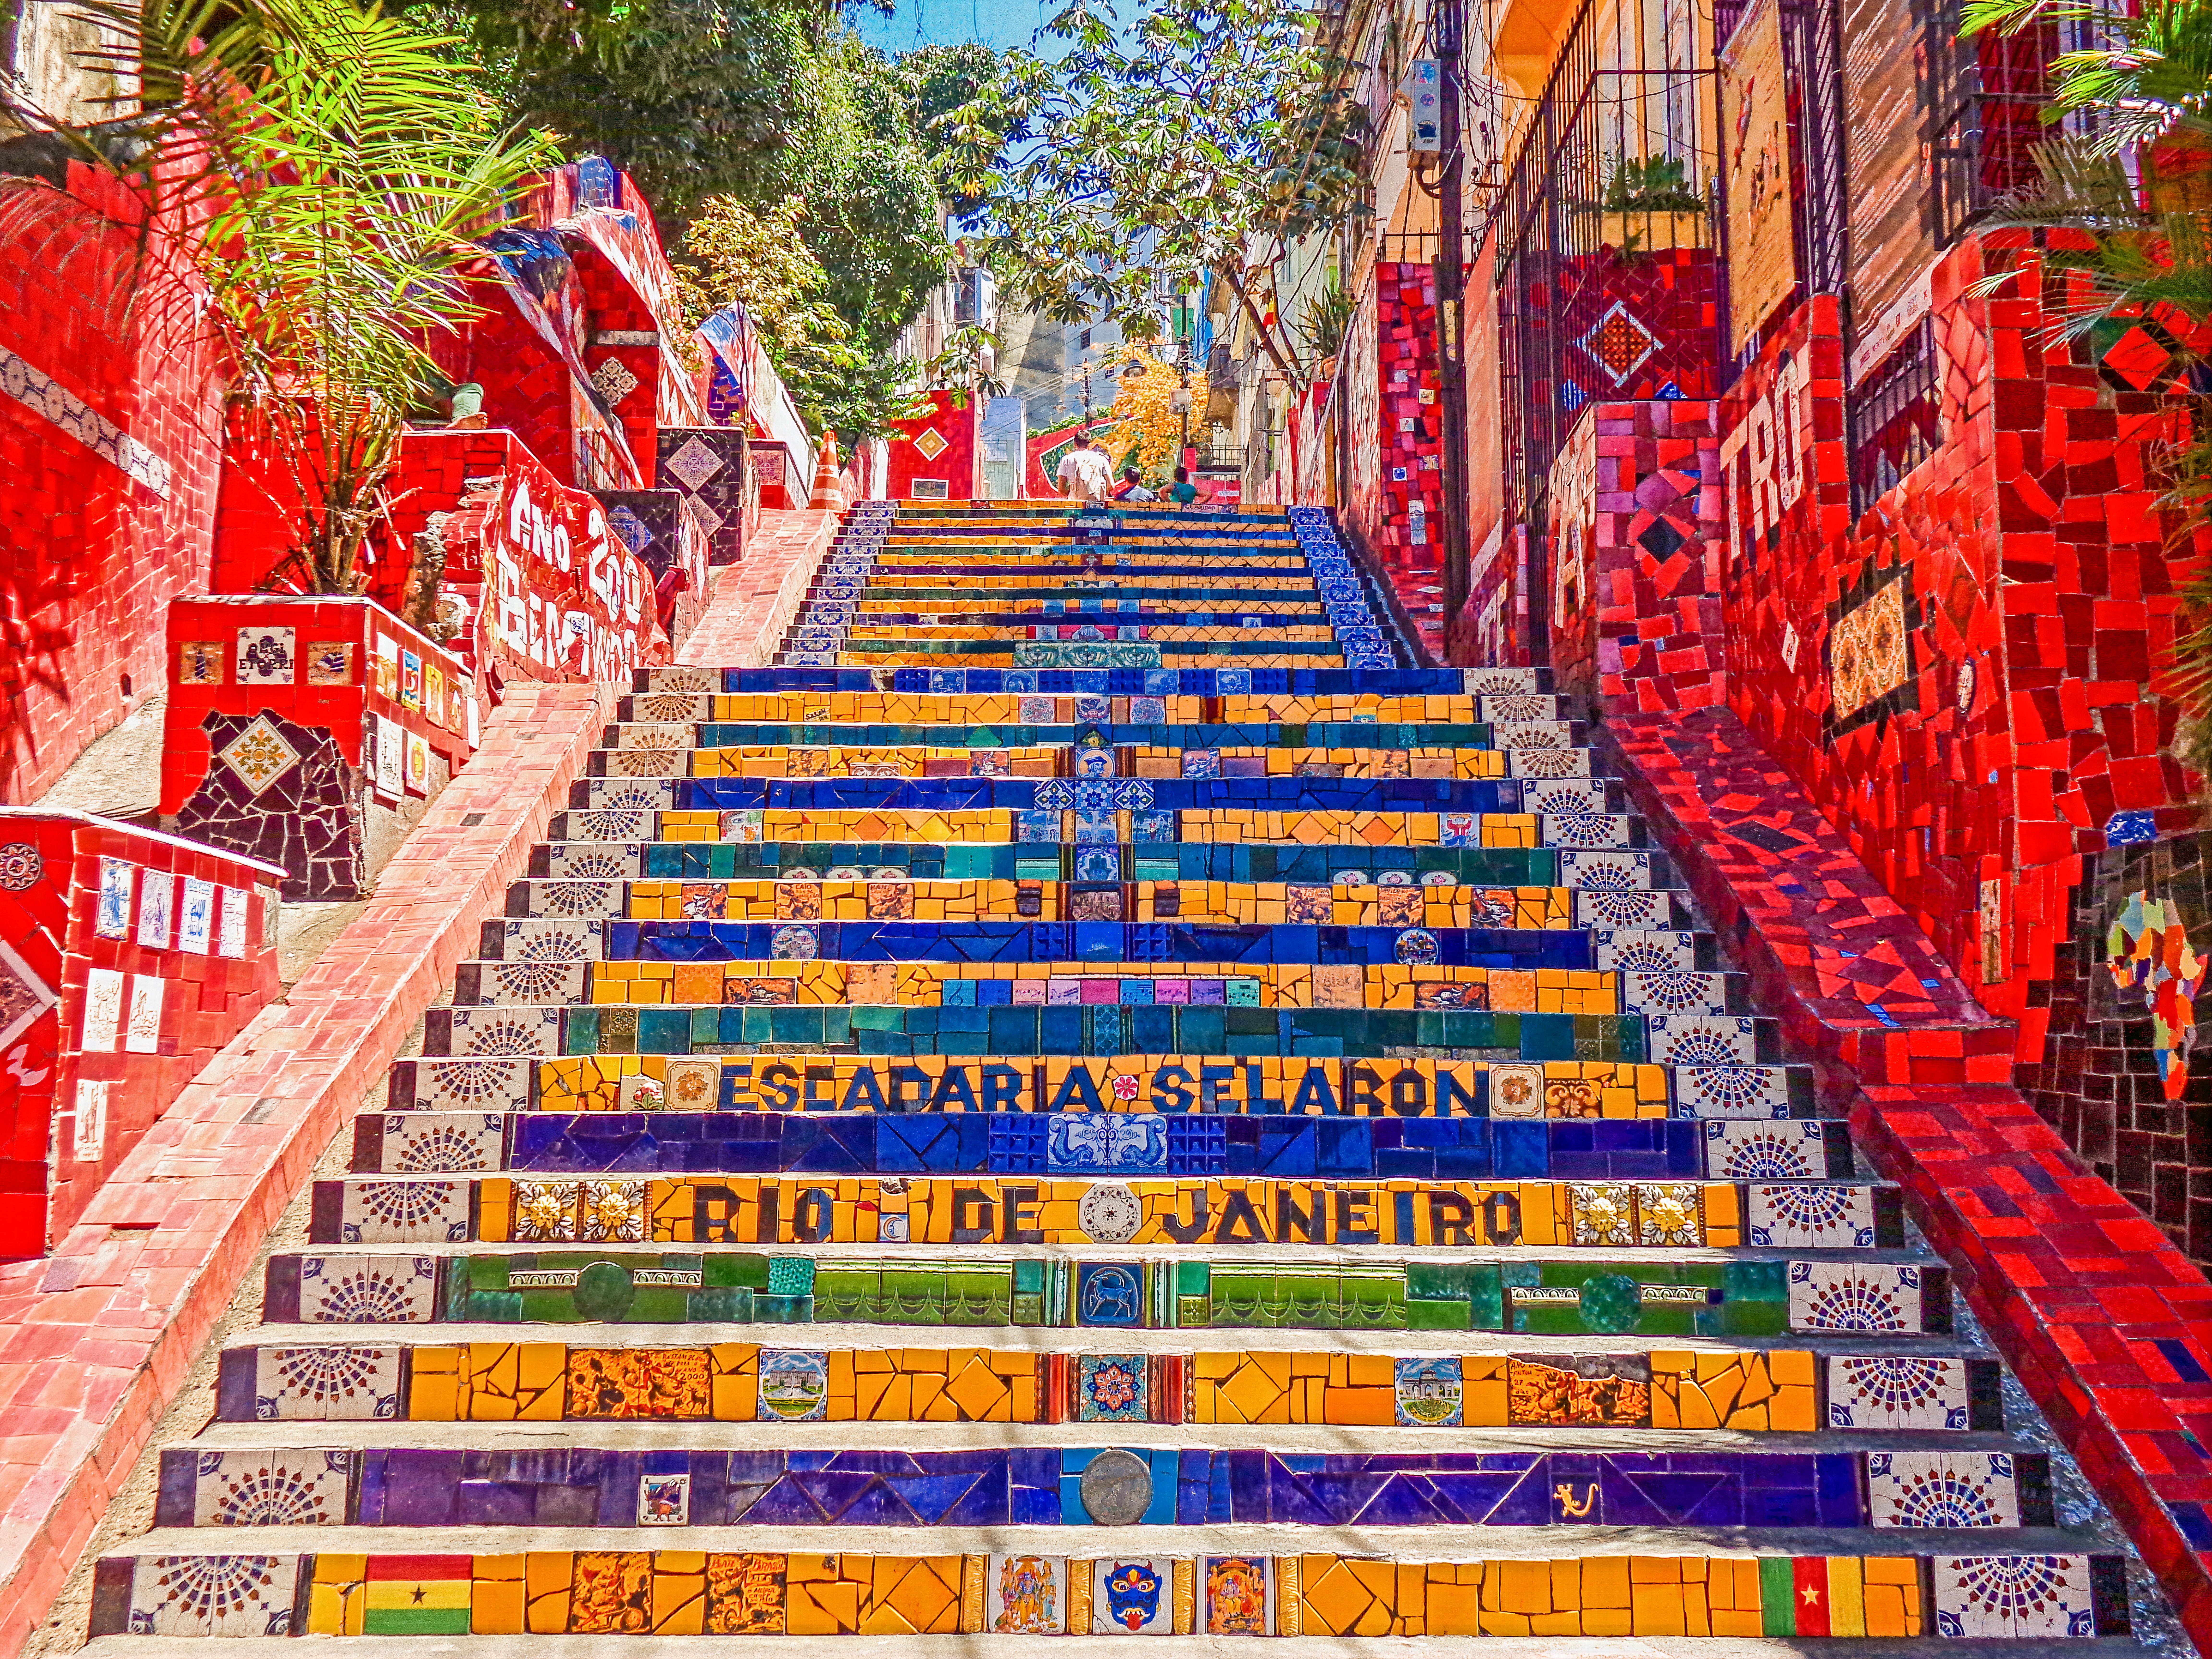 Tiled stairs climb away from the camera. The stairs feature tiles that spell out Escadaria Selaron, Rio de Janeiro.